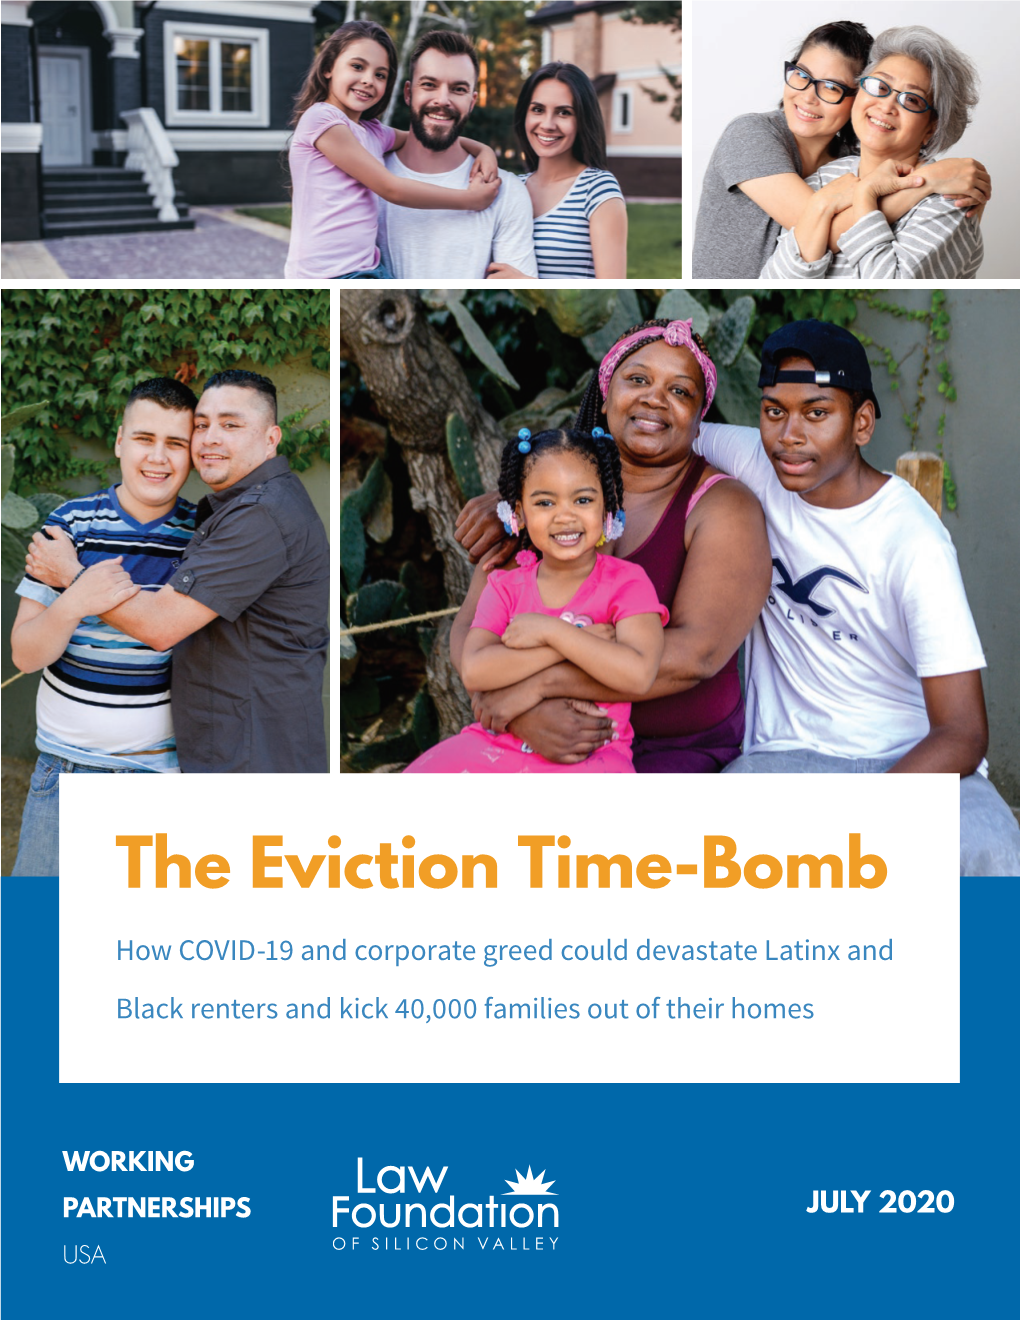 The Eviction Time-Bomb How COVID-19 and Corporate Greed Could Devastate Latinx and Black Renters and Kick 40,000 Families out of Their Homes